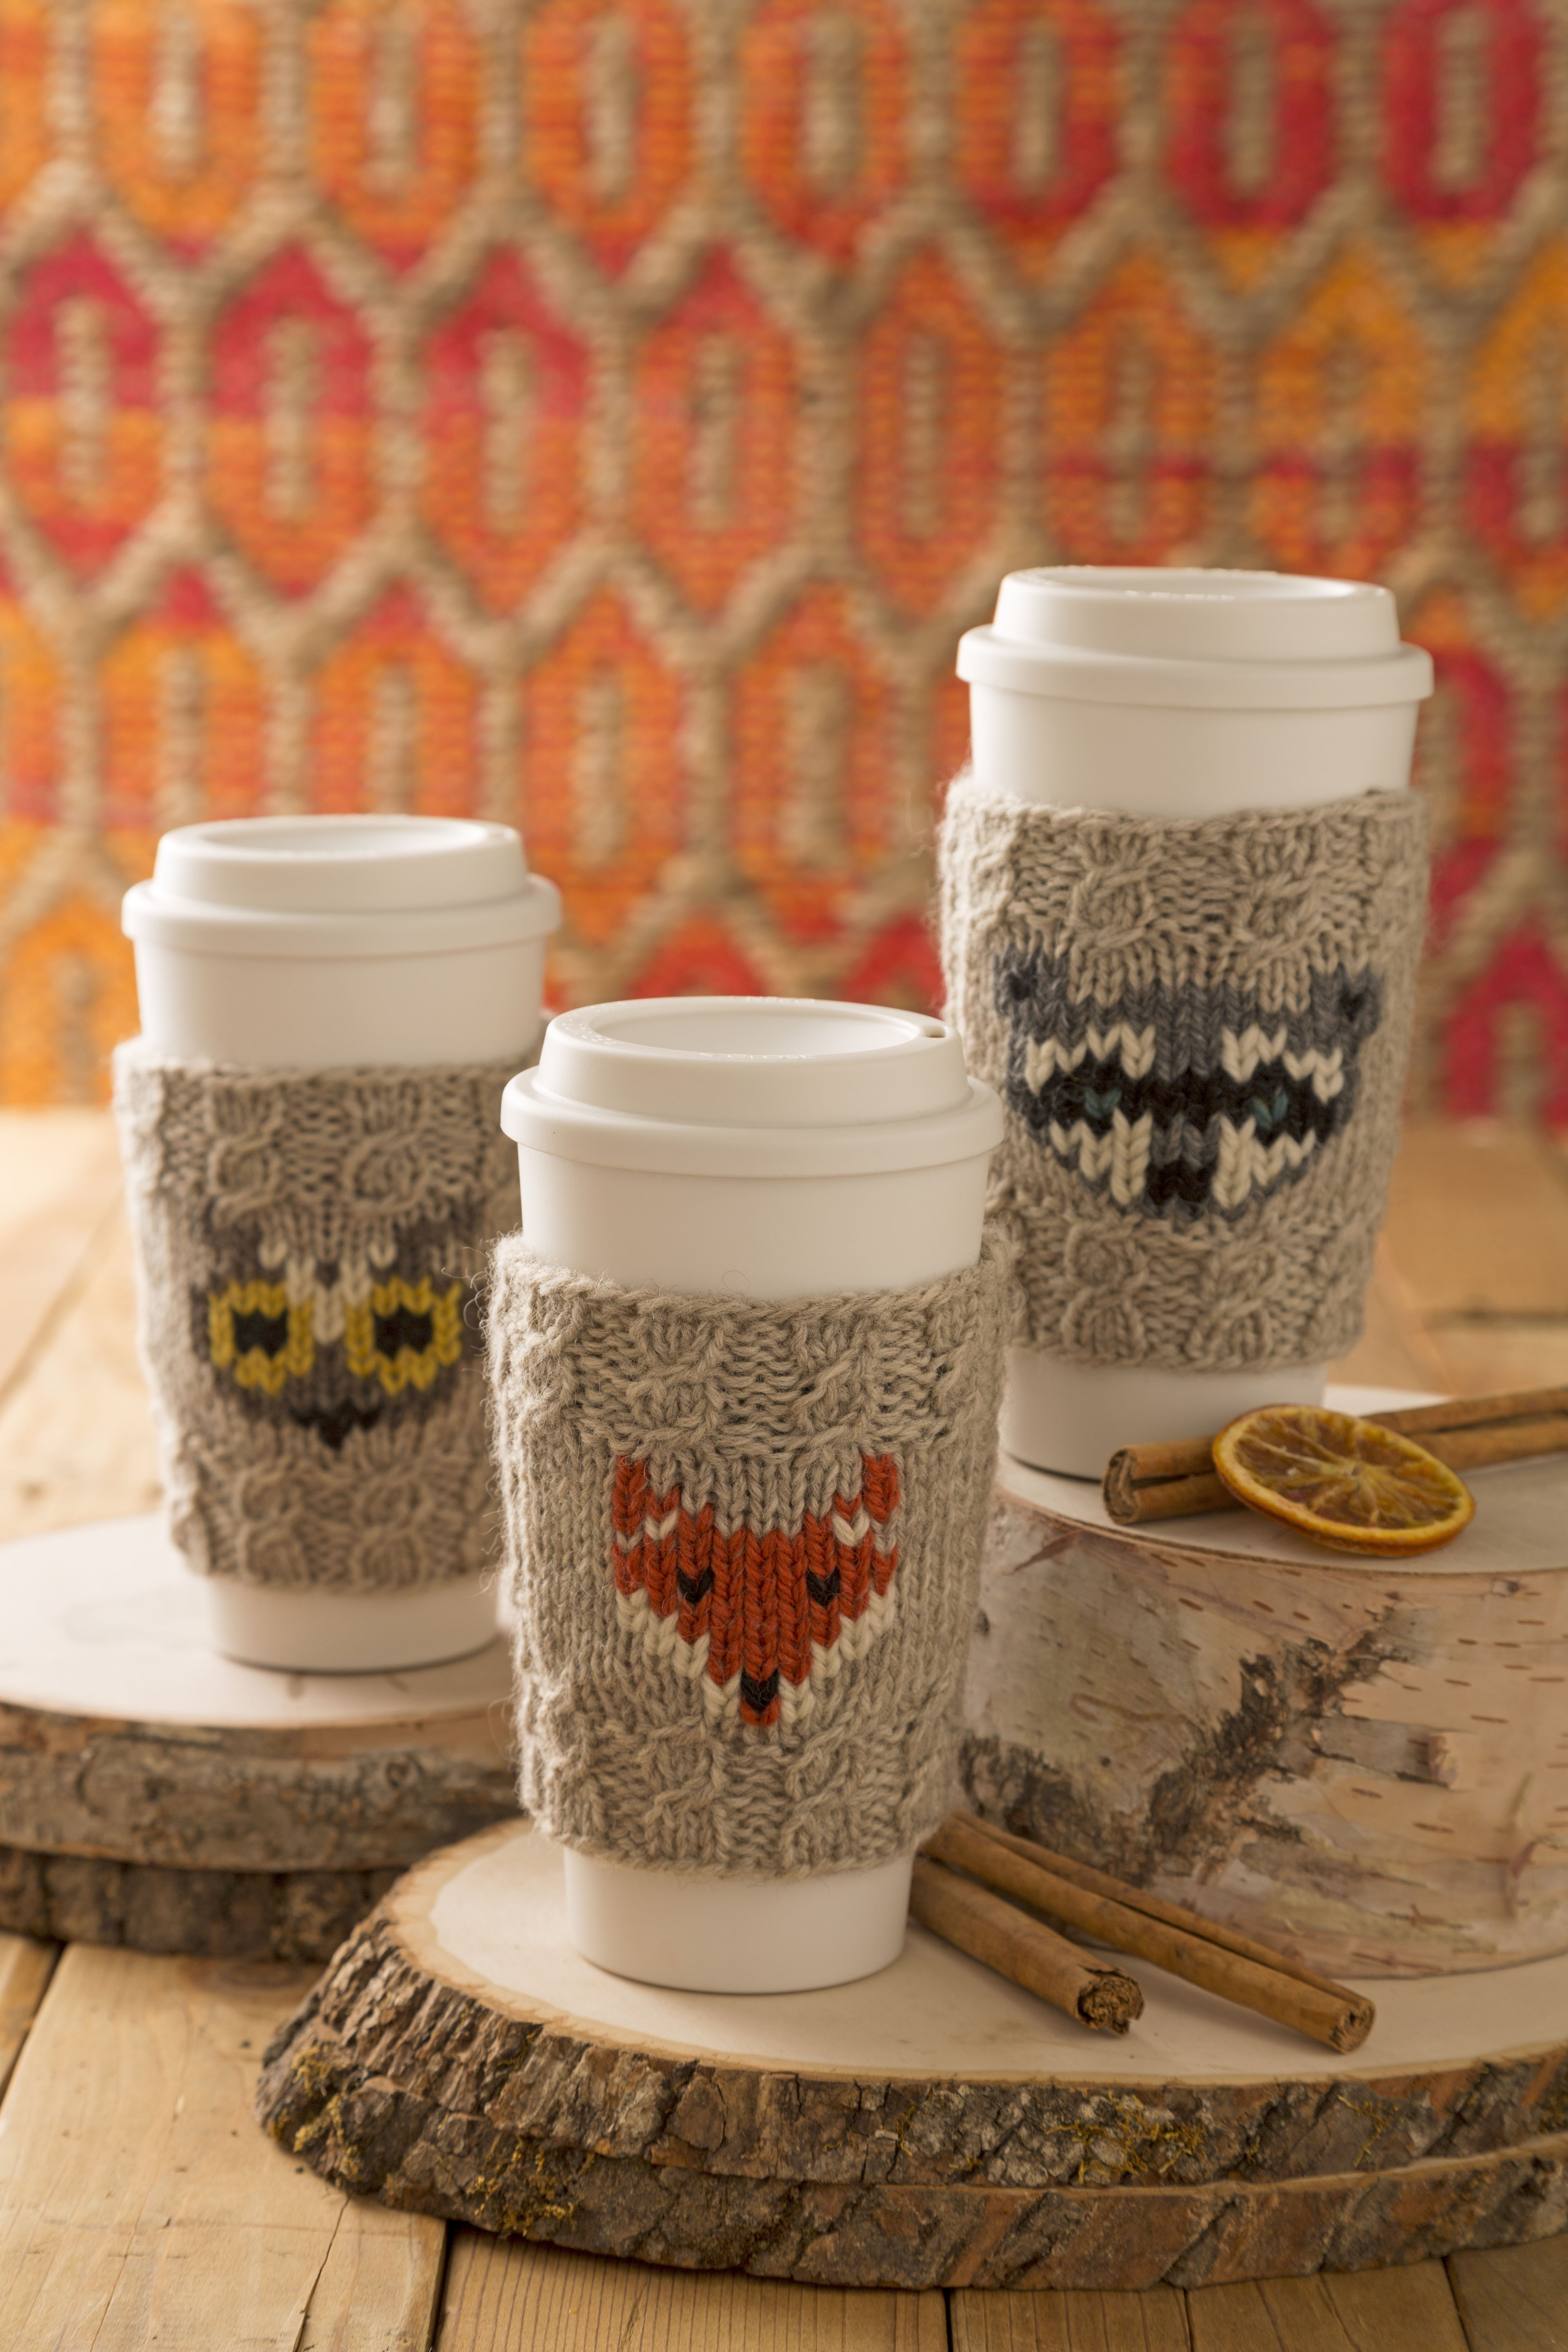 Free knitting pattern for Forest Folk Cup Cozies and more wild animal knitting patterns